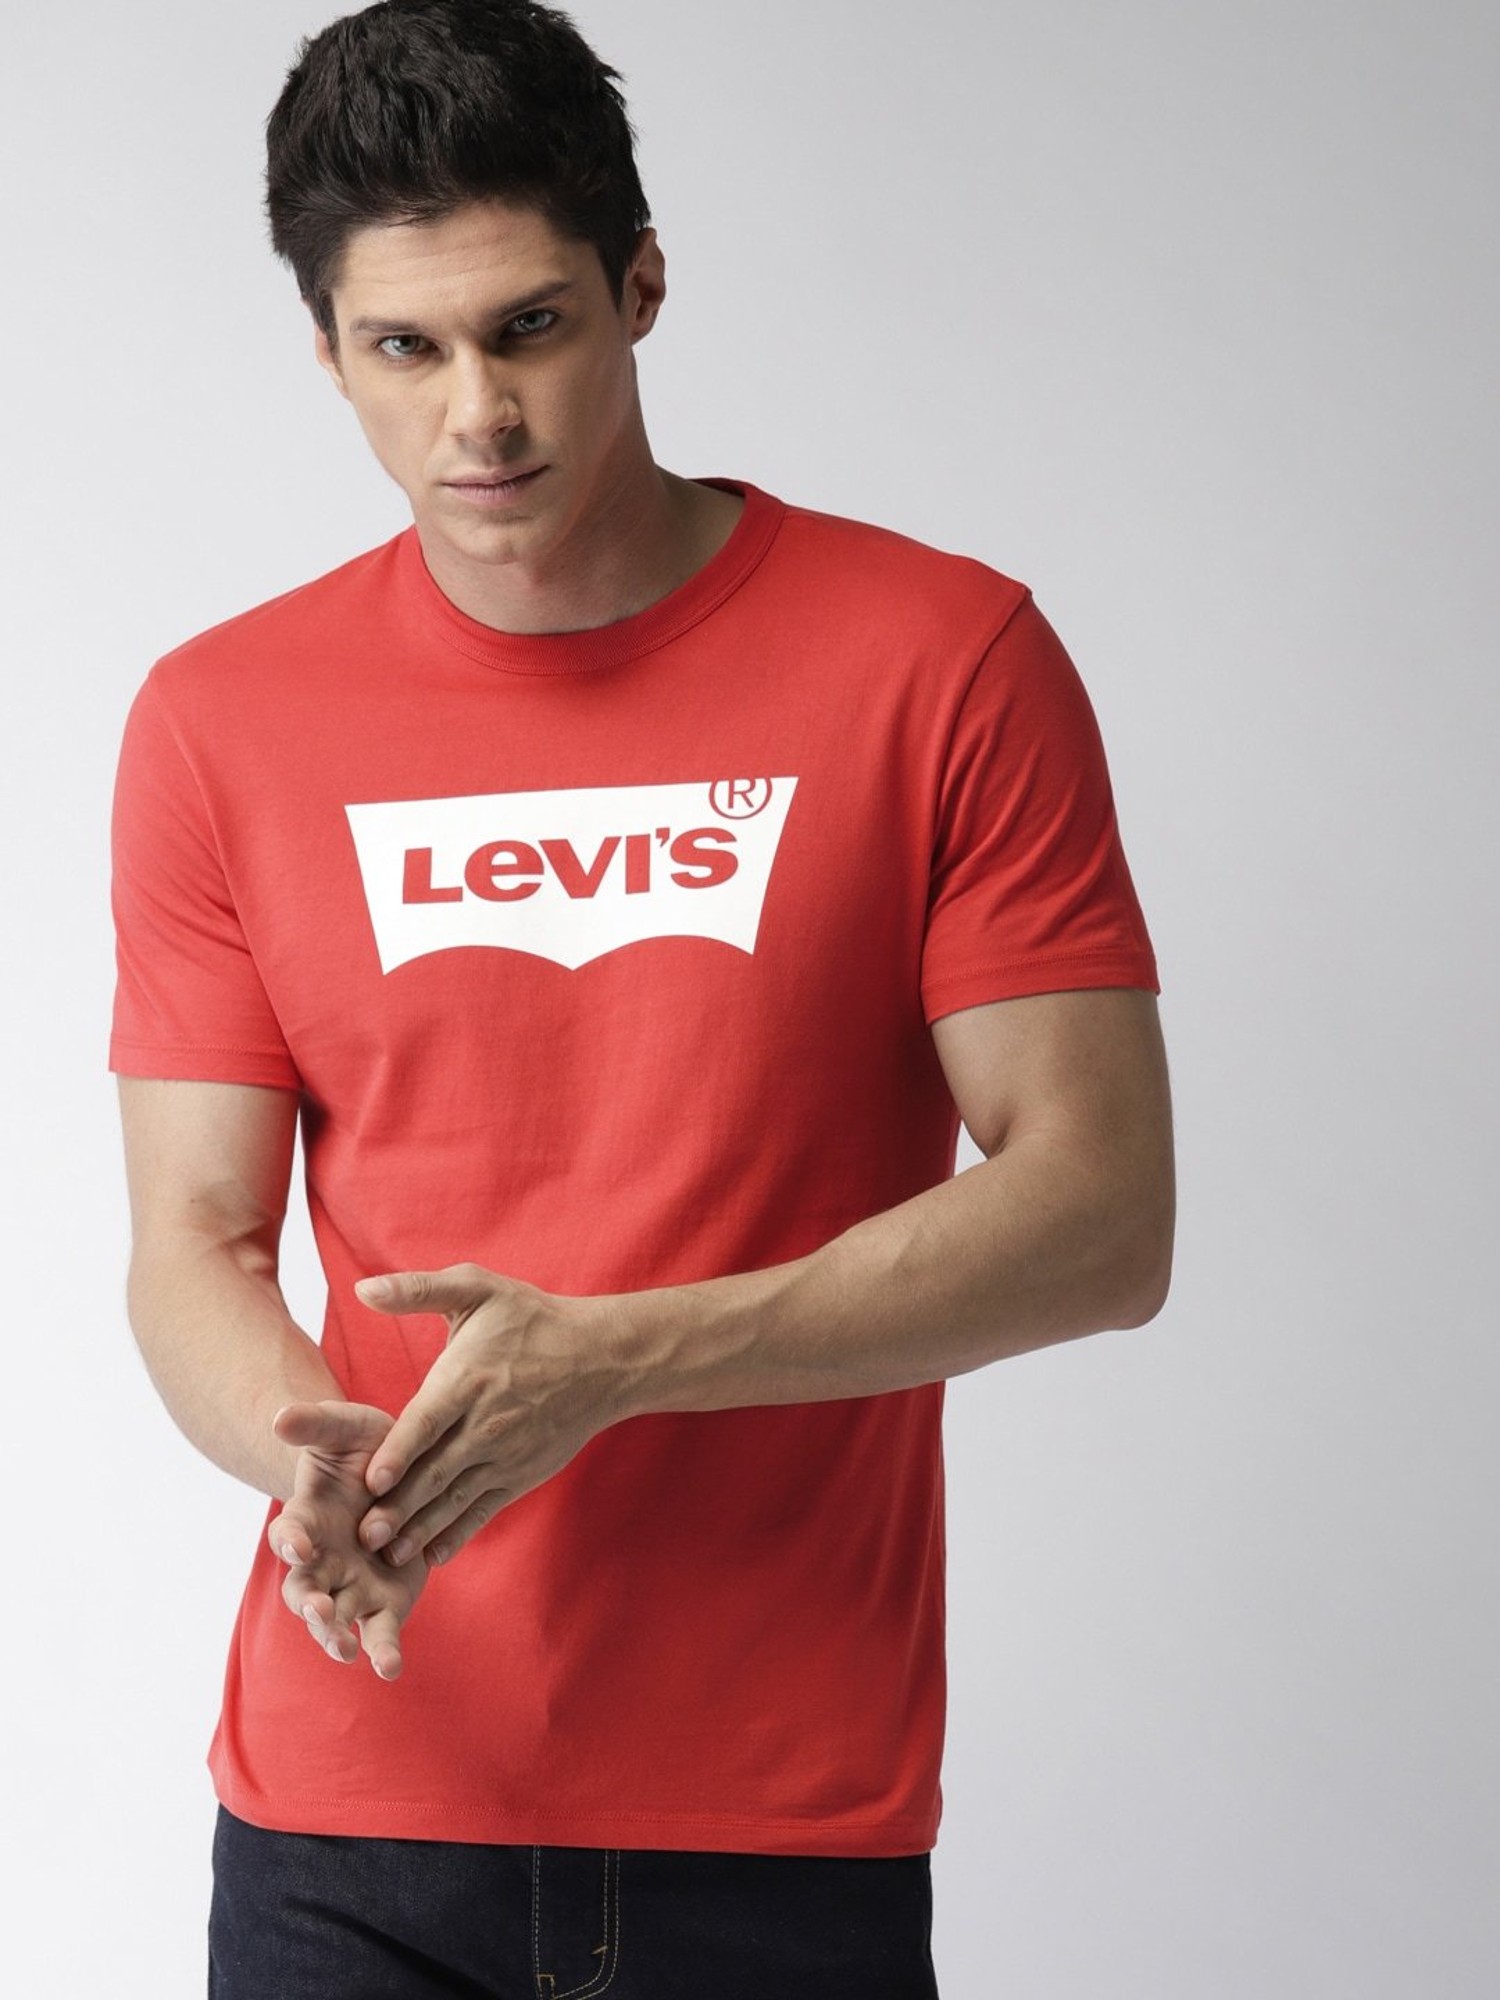 Buy White Tshirts for Girls by LEVIS Online | Ajio.com